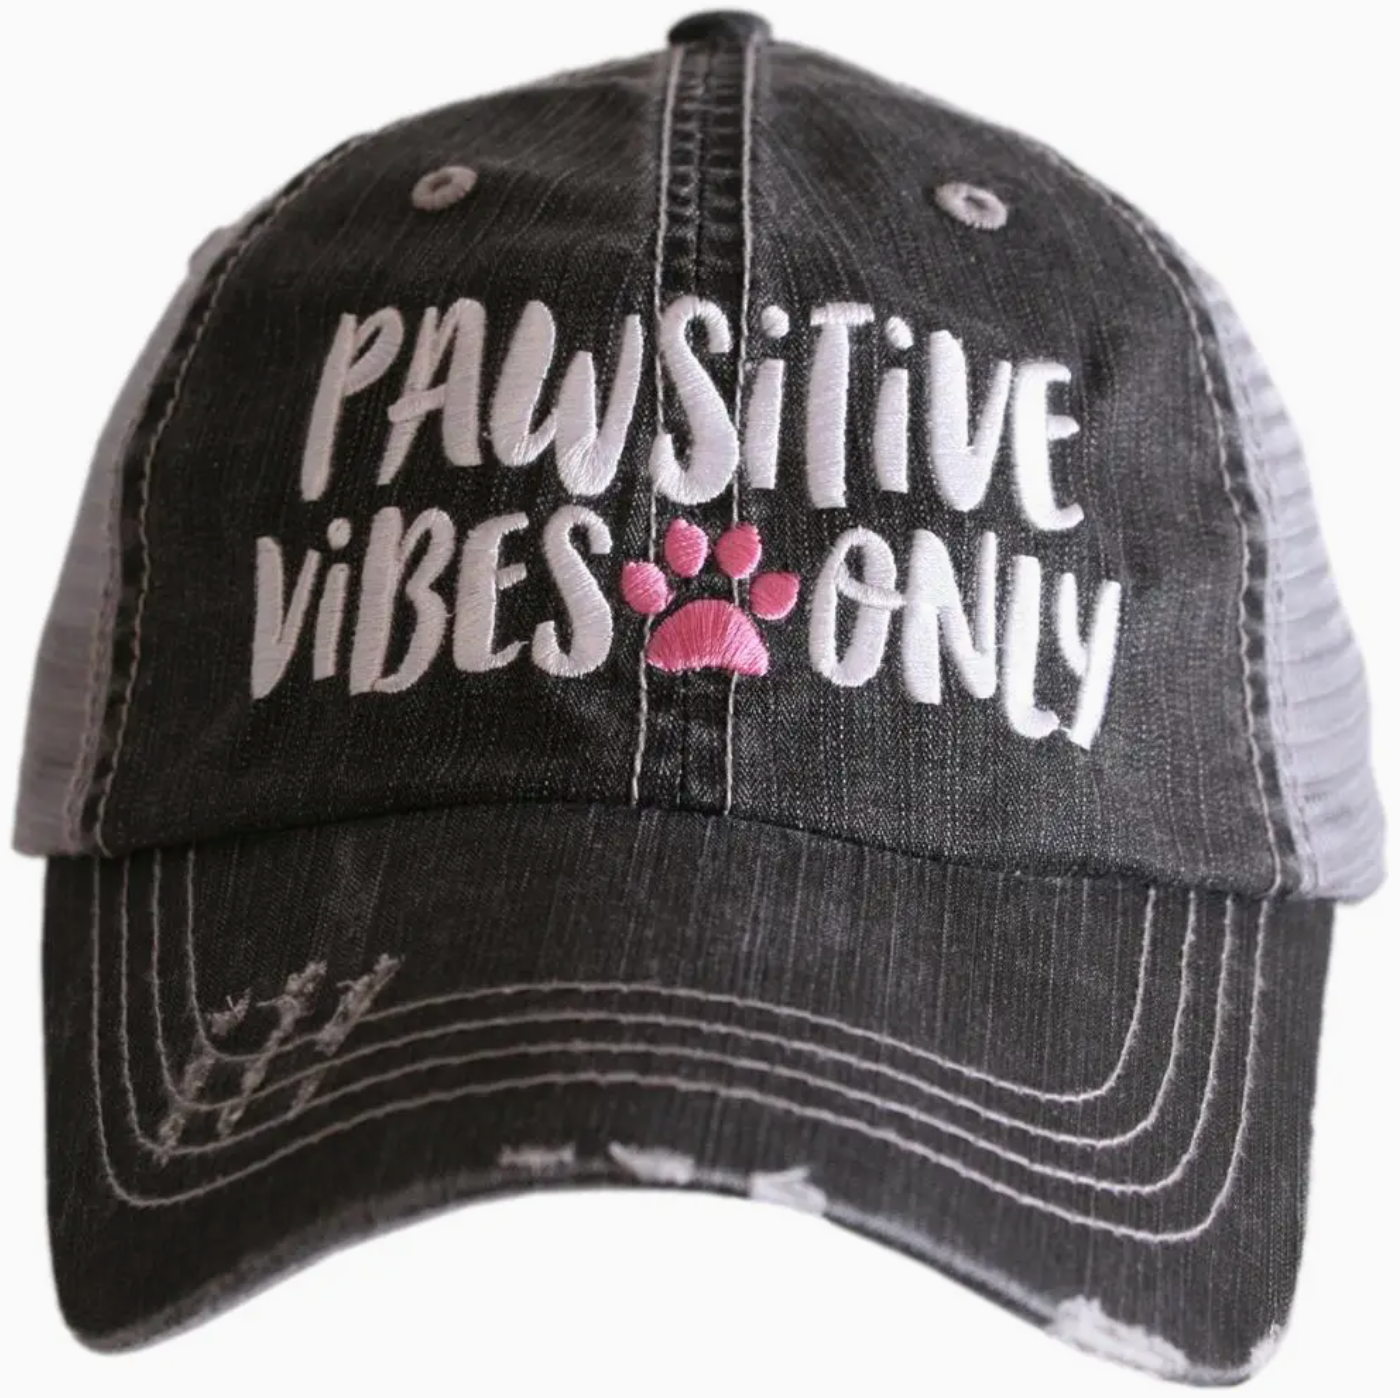 "Pawsitive Vibe Only" Trucker Hat - The Street Boutique 